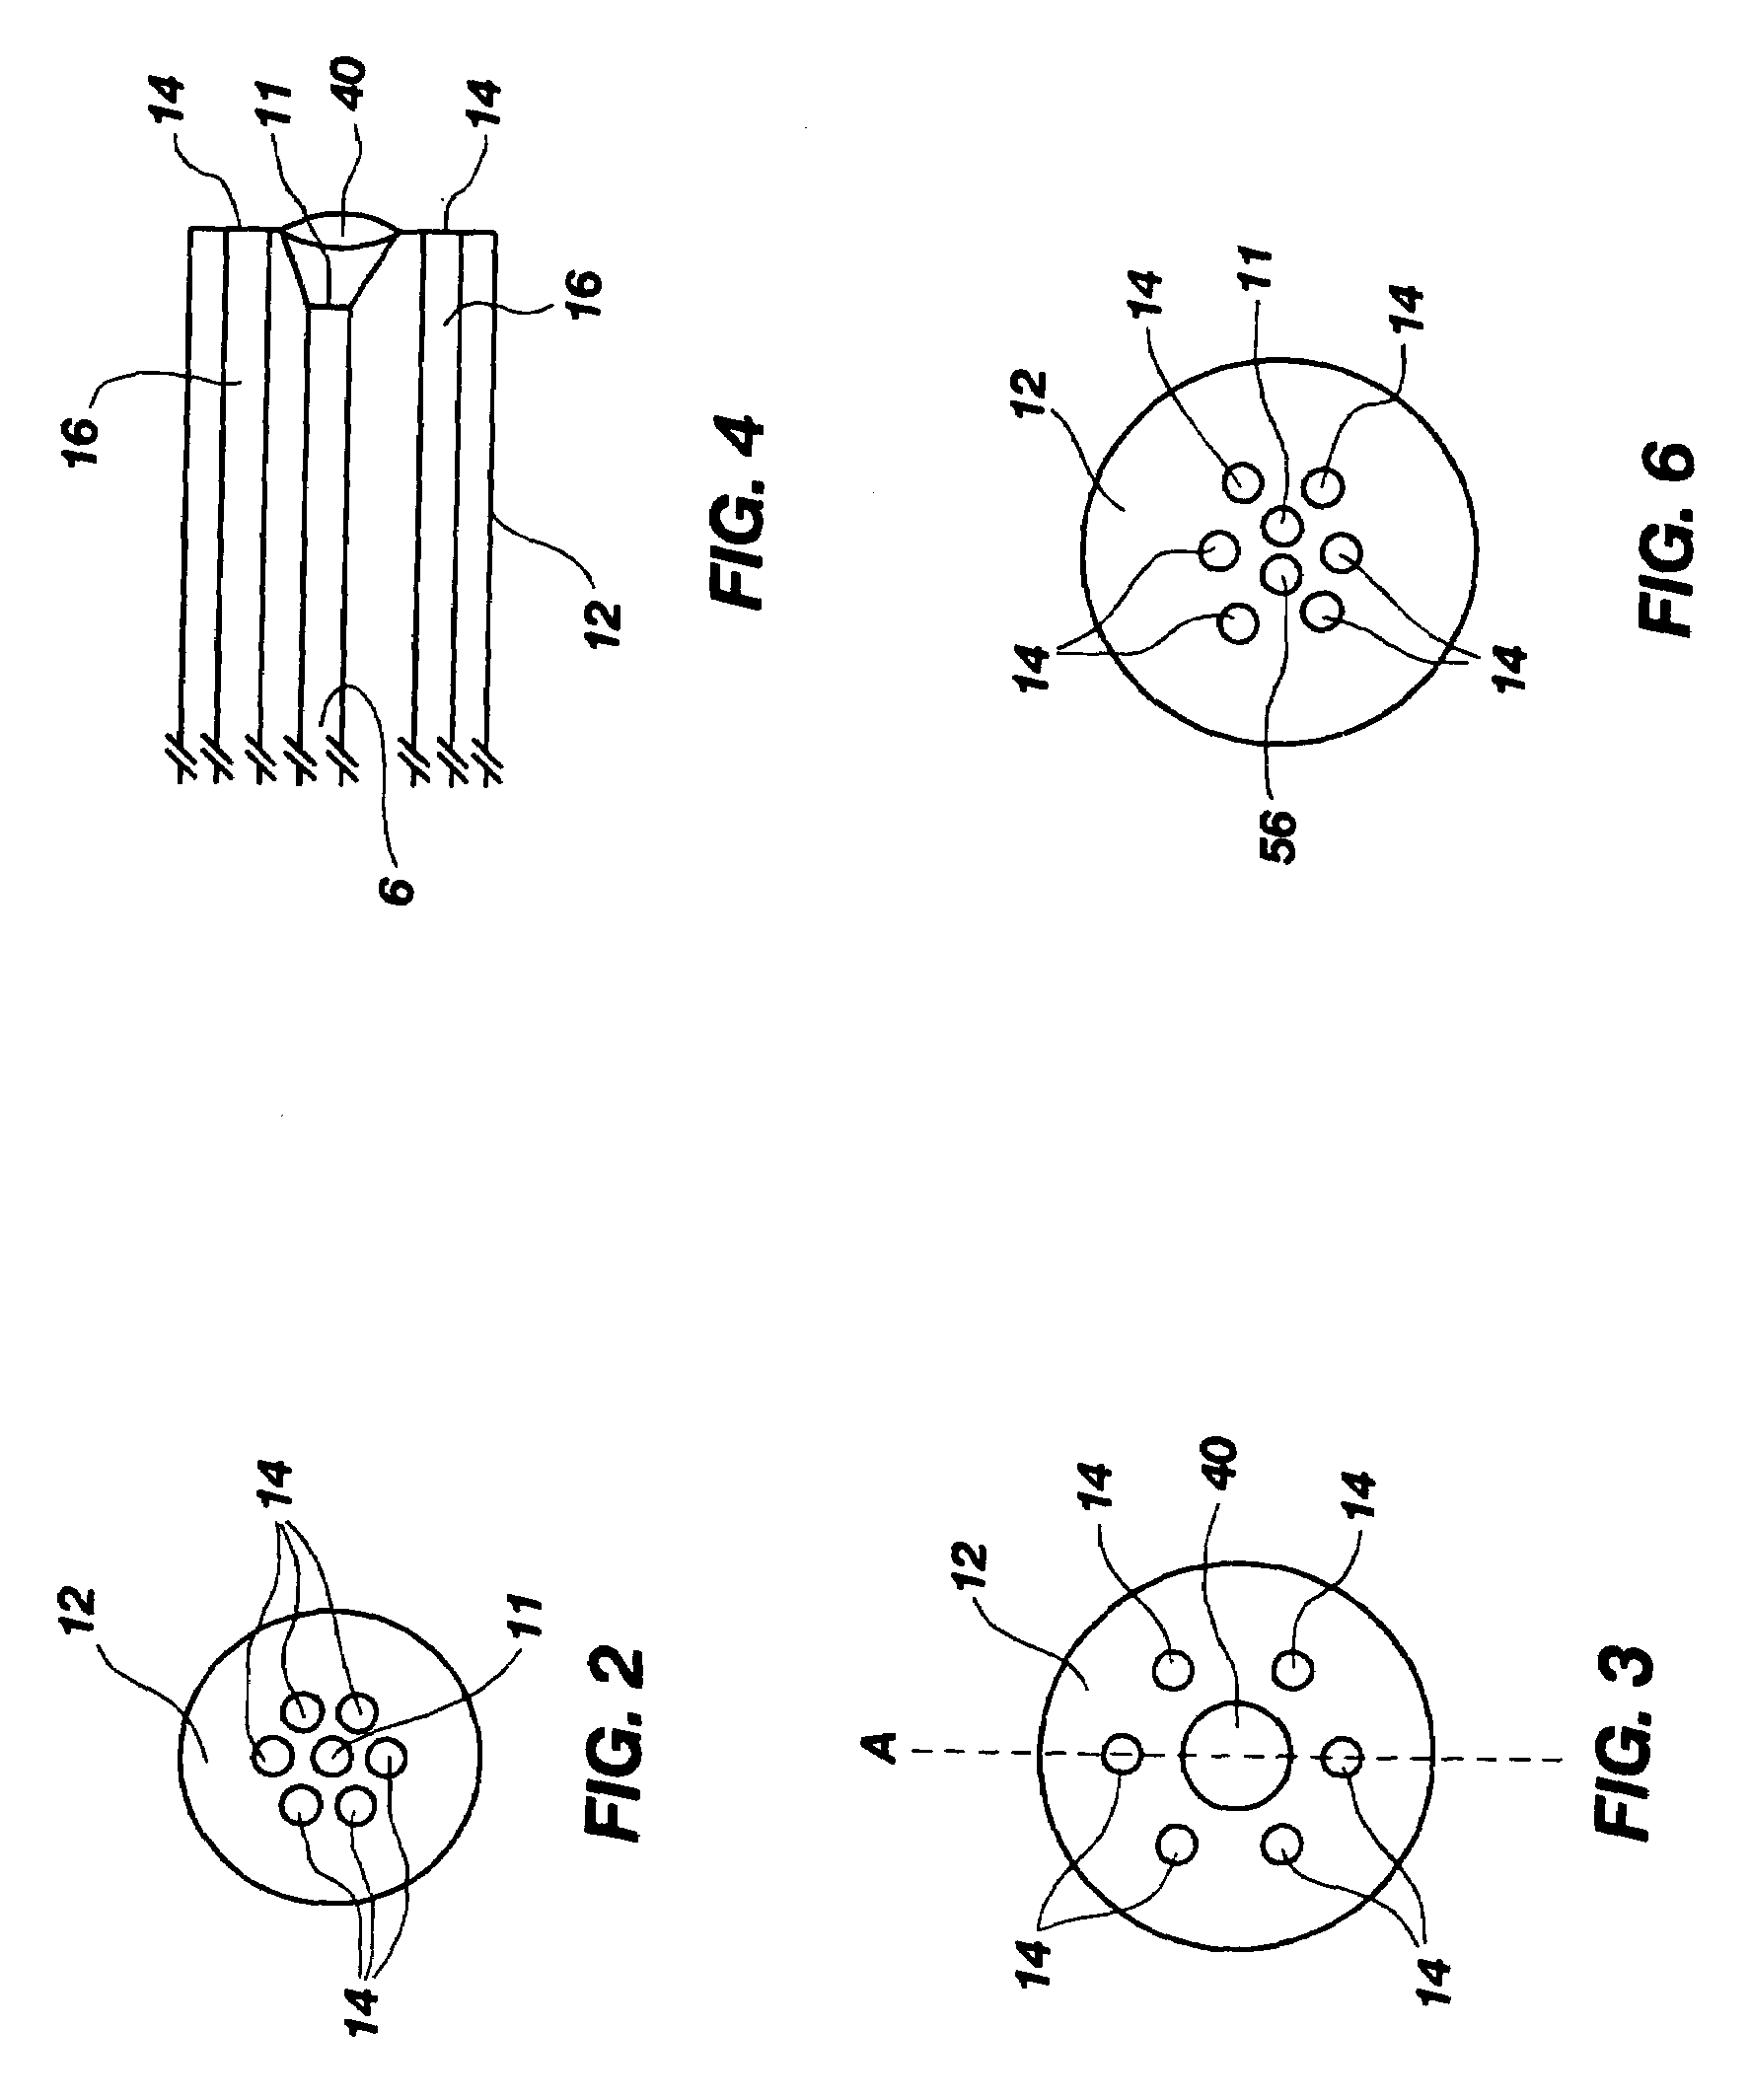 Devices and methods for fluorescent inspection and/or removal of material in a sample